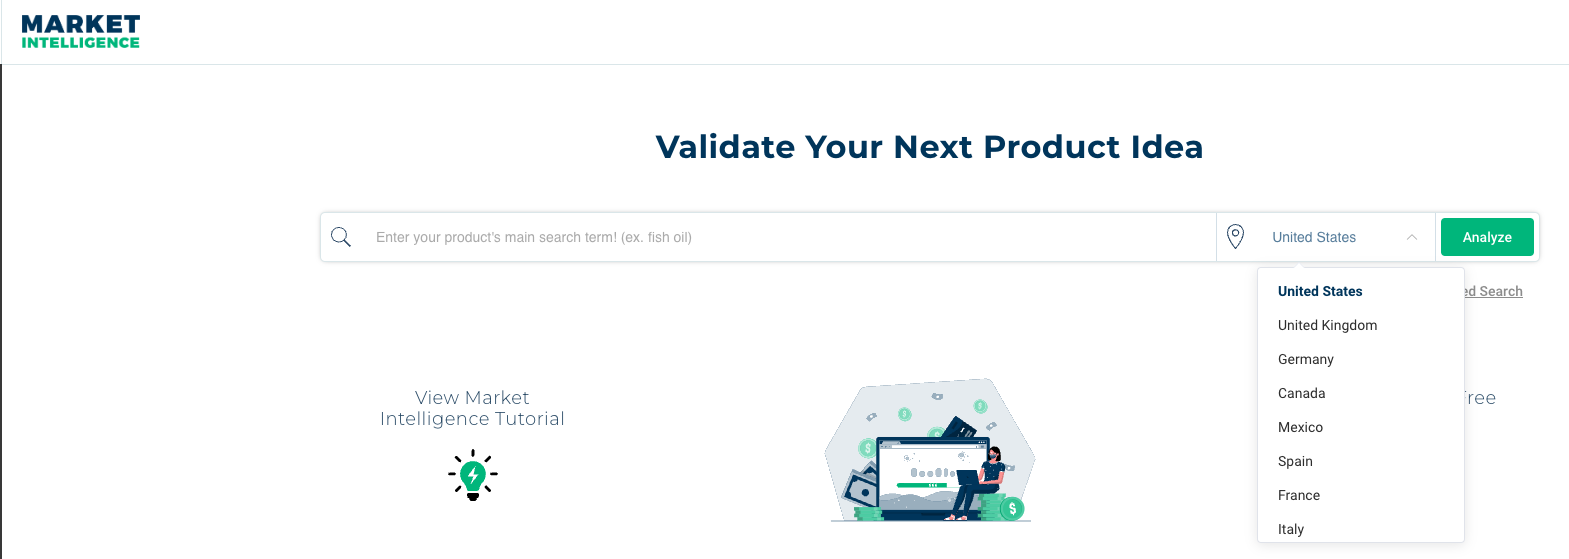 Validate your next product idea with Viral Launch's Amazon Market Intelligence tool.